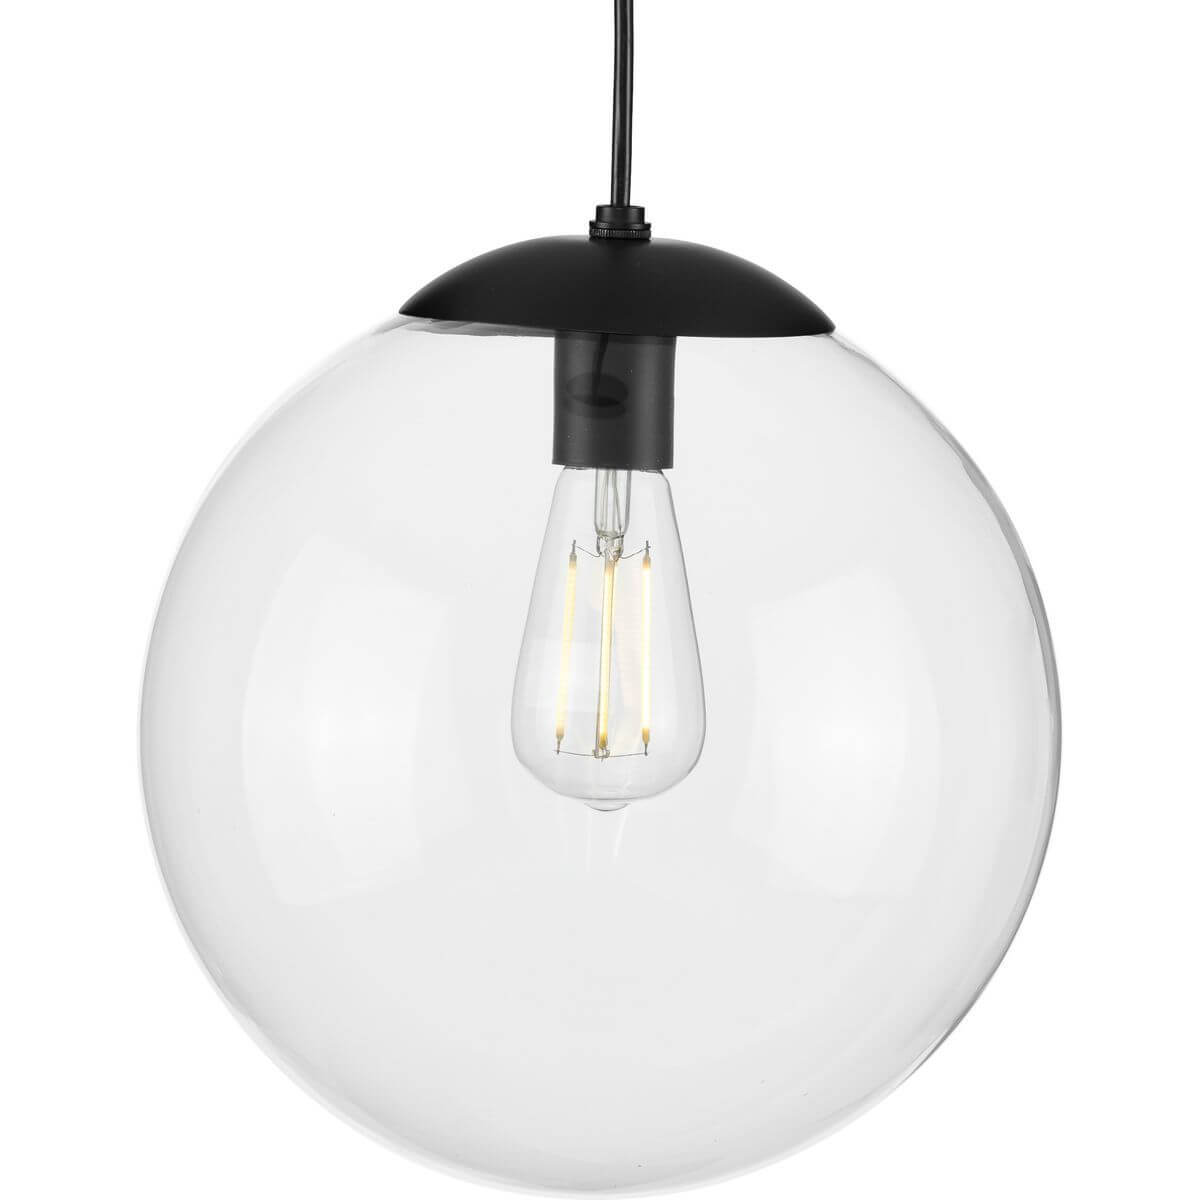 Progress Lighting Atwell 1 Light 12 inch Pendant in Matte Black with Clear Glass P500311-031